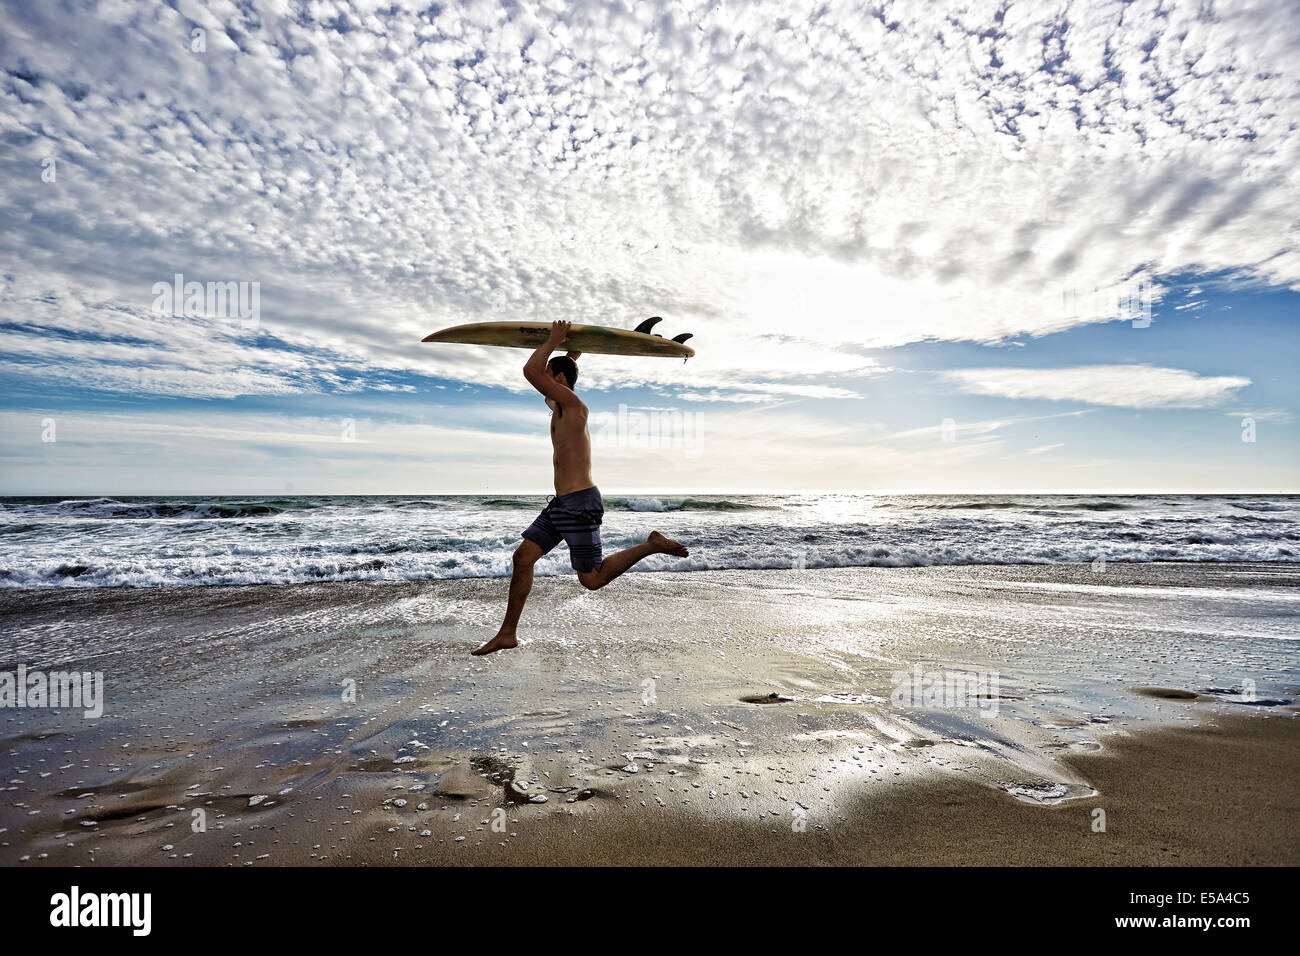 Caucasian man jumping with surfboard on beach Stock Photo